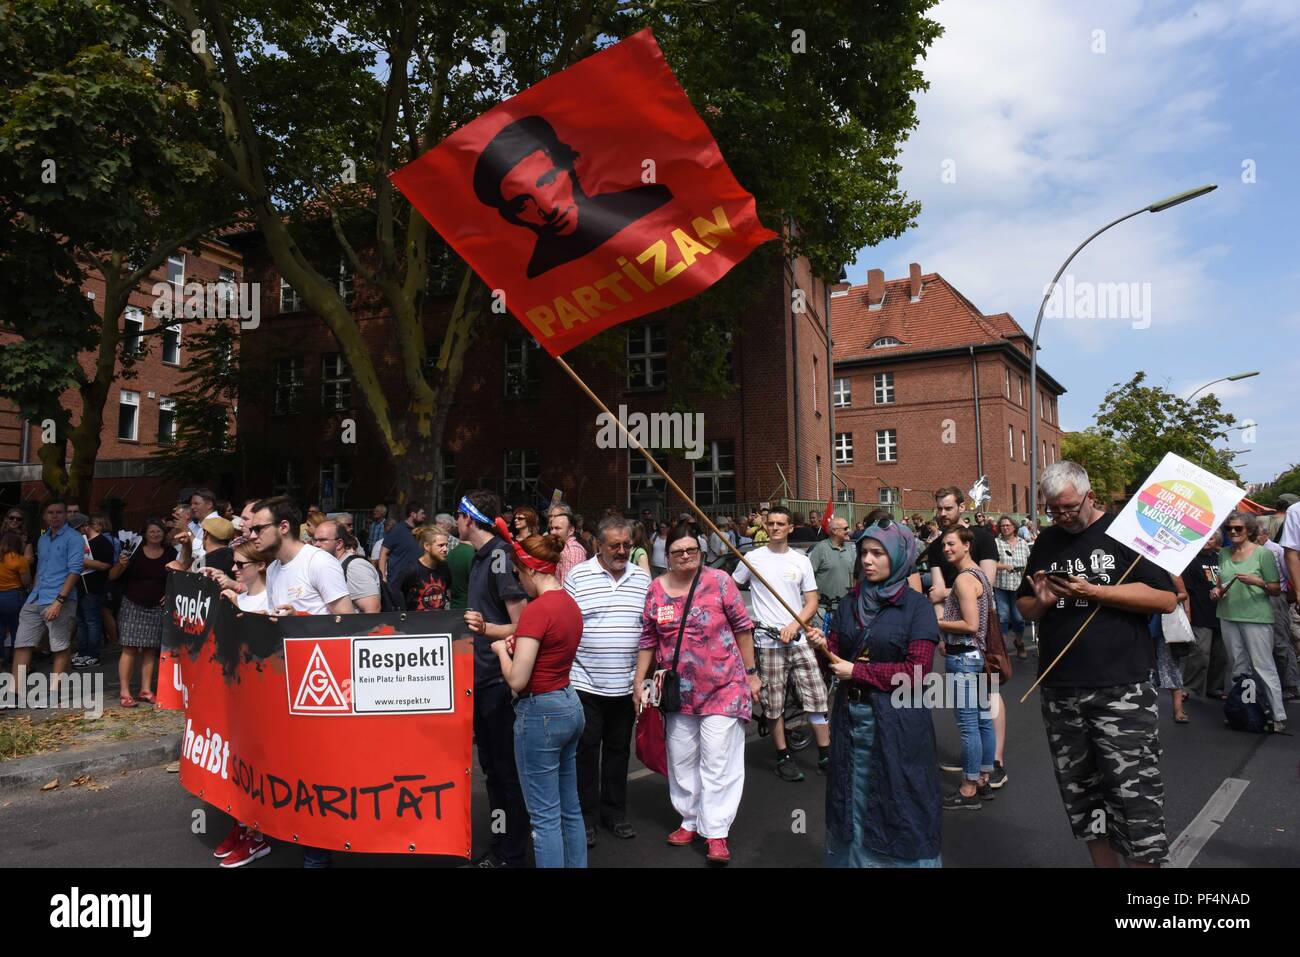 Berlin, Germany. 18th Aug, 2018. Counter-protests take place in Berlin as Neo-Nazis mark the 31st anniversary of the death of Hitler's former deputy Rudolf Hess. Credit: Sean Smuda/ZUMA Wire/ZUMAPRESS.com/Alamy Live News Stock Photo